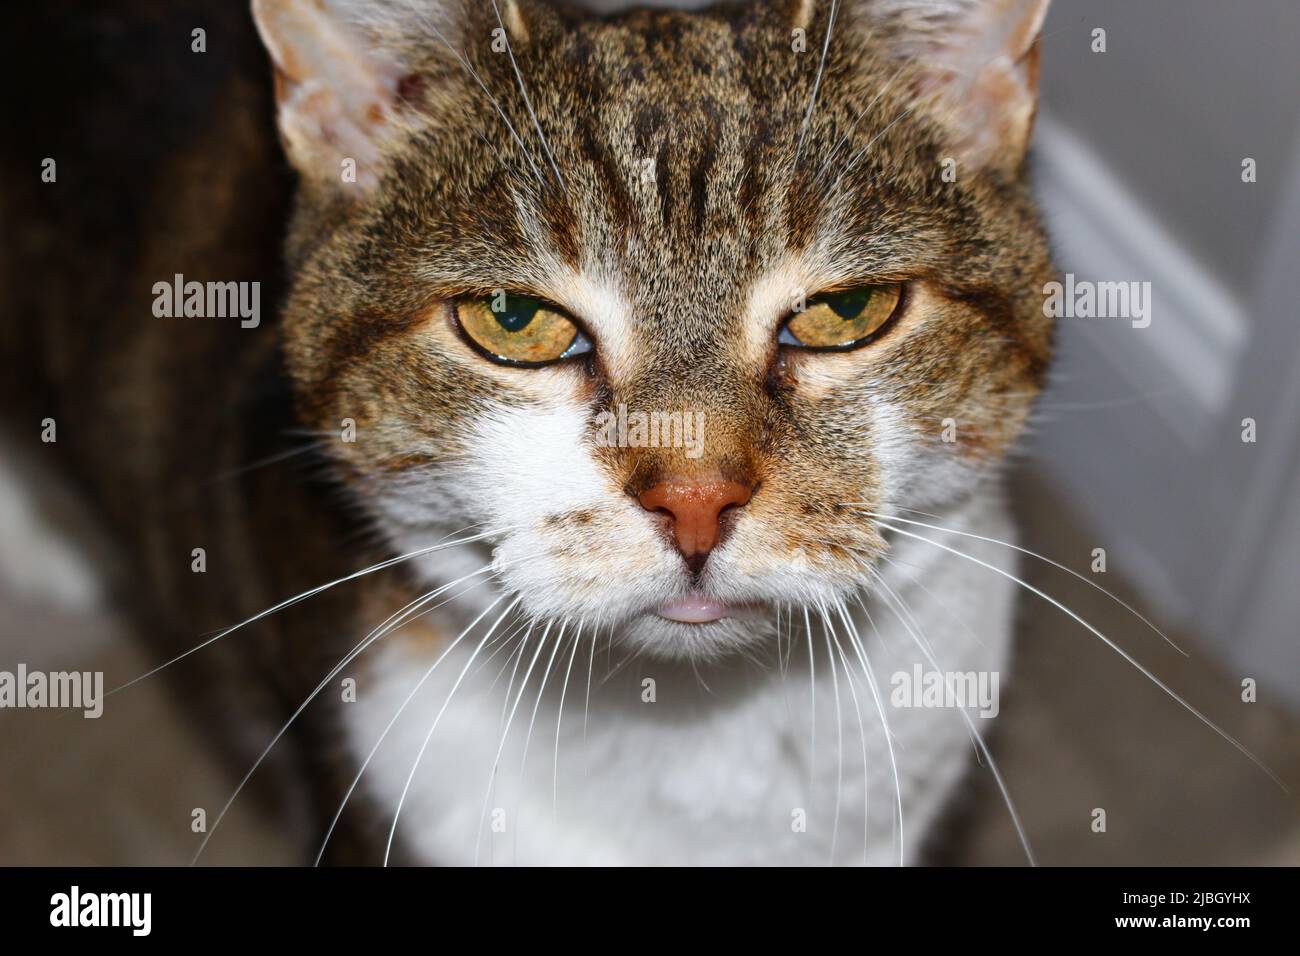 Annoyed Cat Angry Face Portrait Disgruntled Pet Evil Looking Concept Stock  Photo by ©LeonidSorokin 203880624